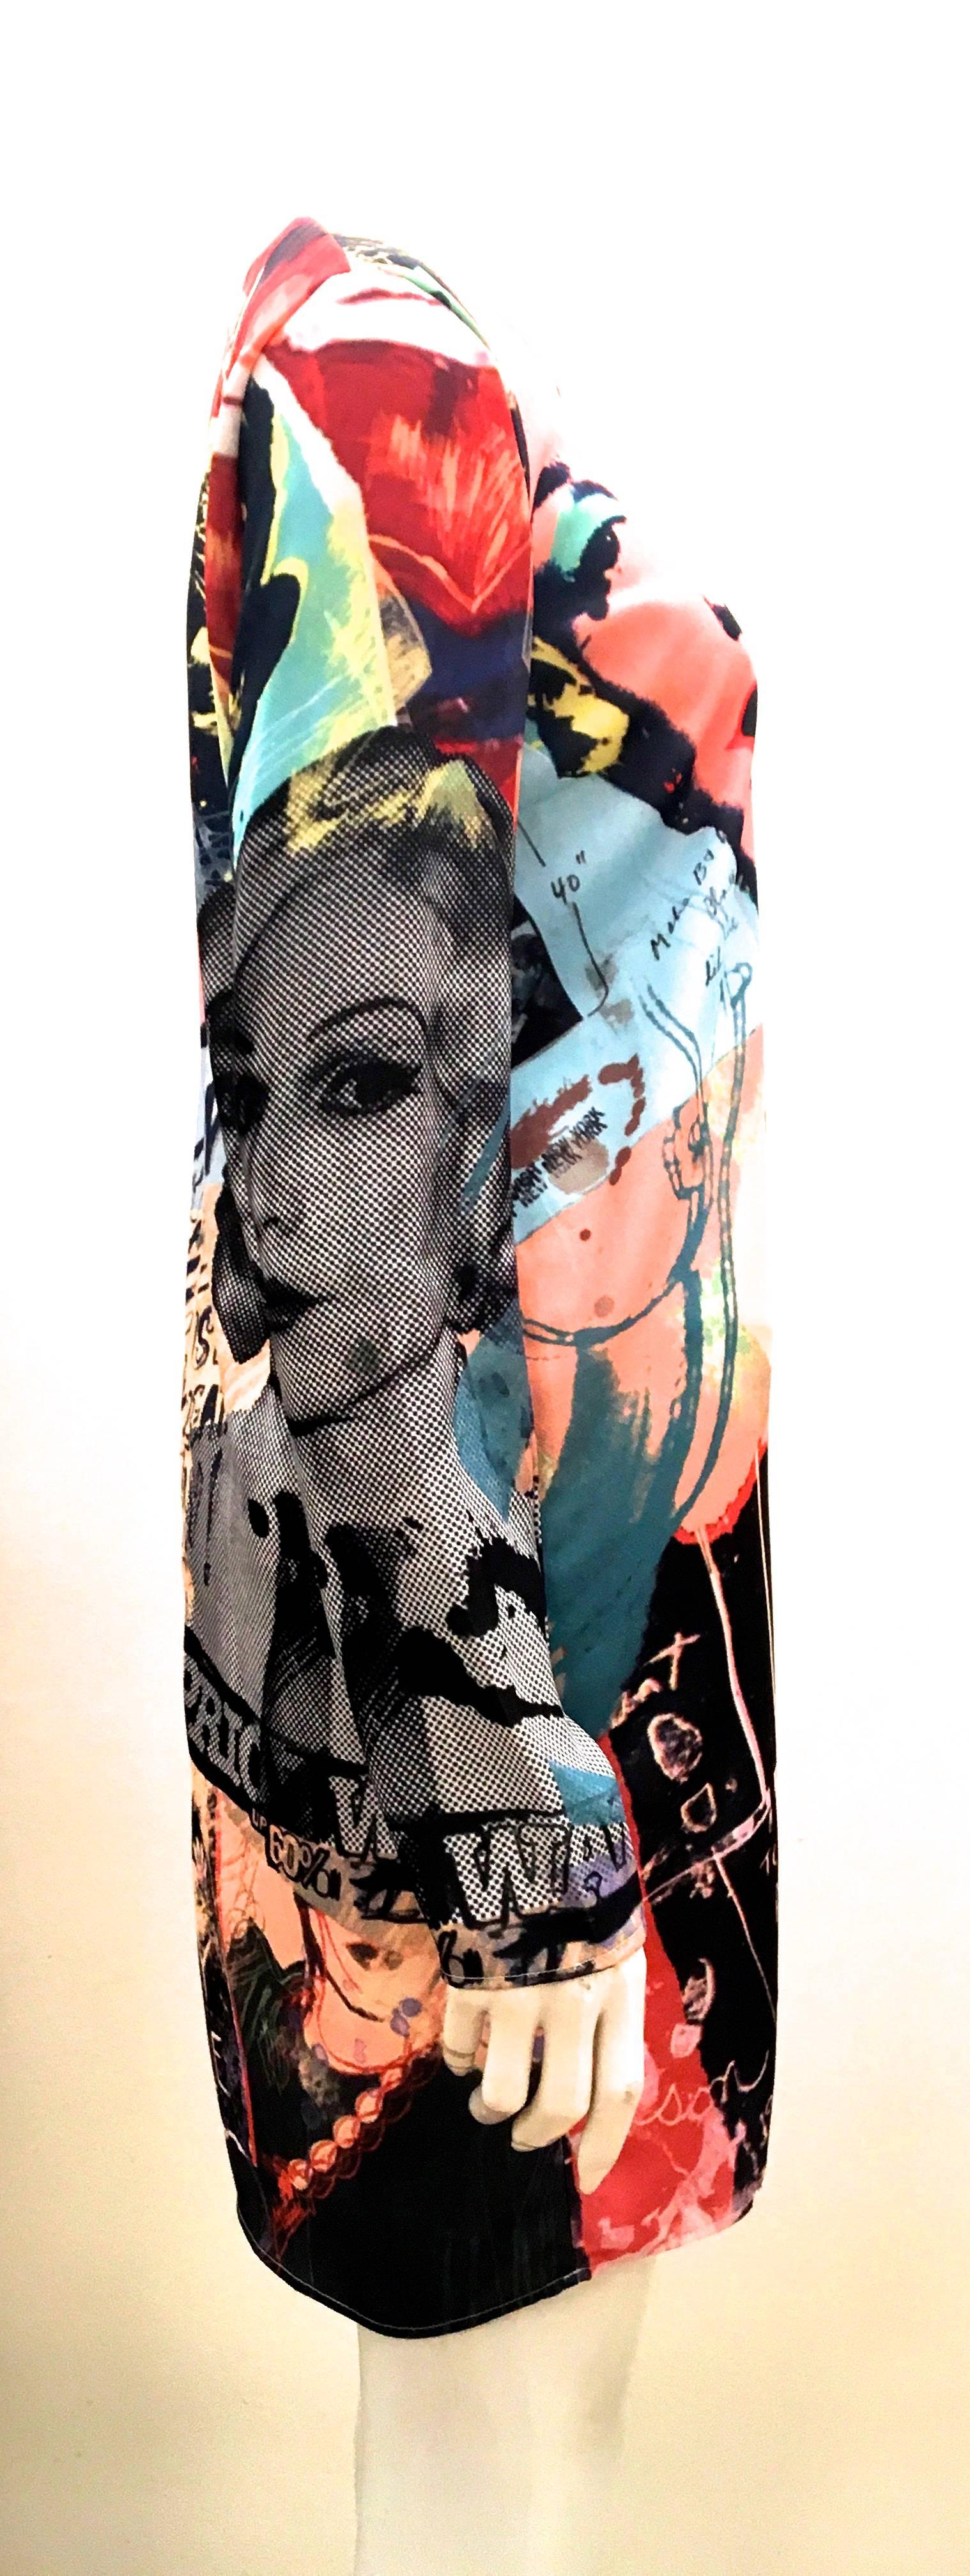 New Andy Warhol Dress - Marilyn Monroe - Rare In New Condition For Sale In Boca Raton, FL